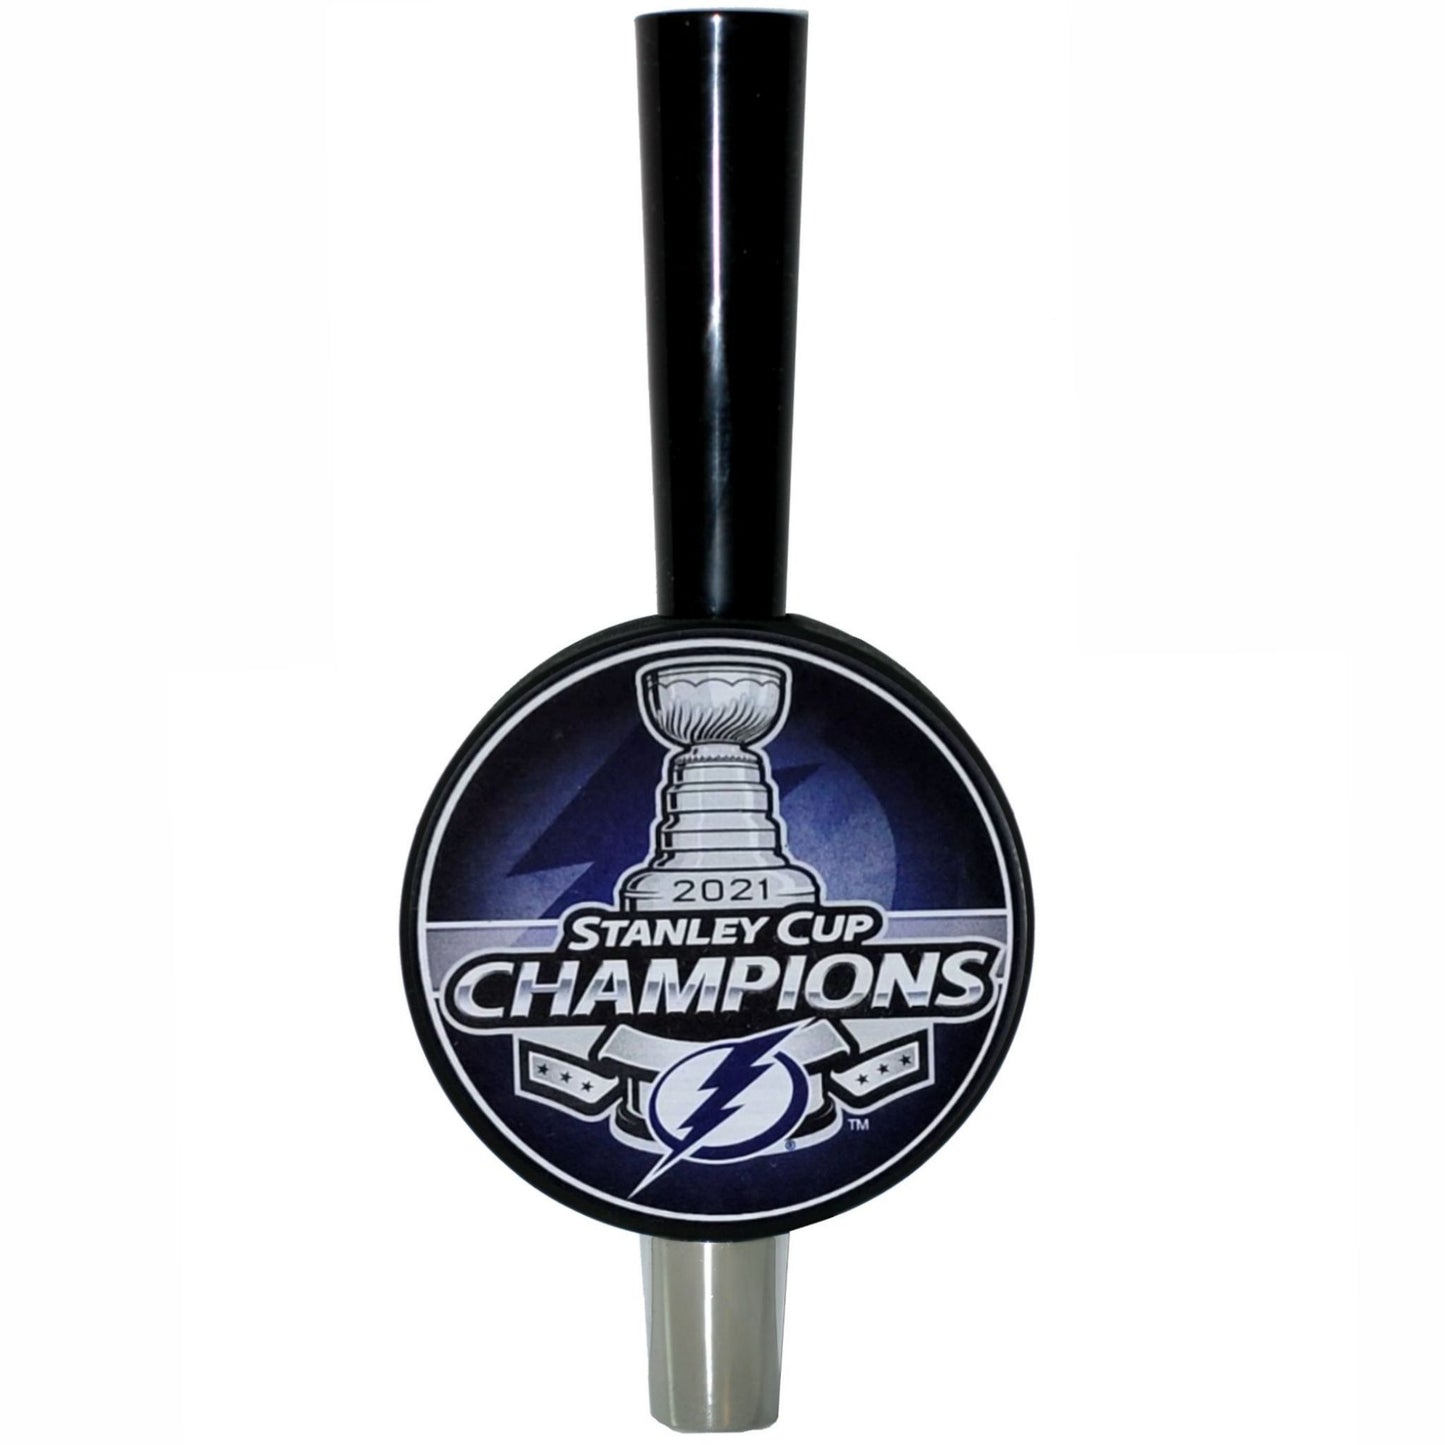 Tampa Bay Lightning 2021 Stanley Cup Champions Tall-Boy Hockey Puck Beer Tap Handle